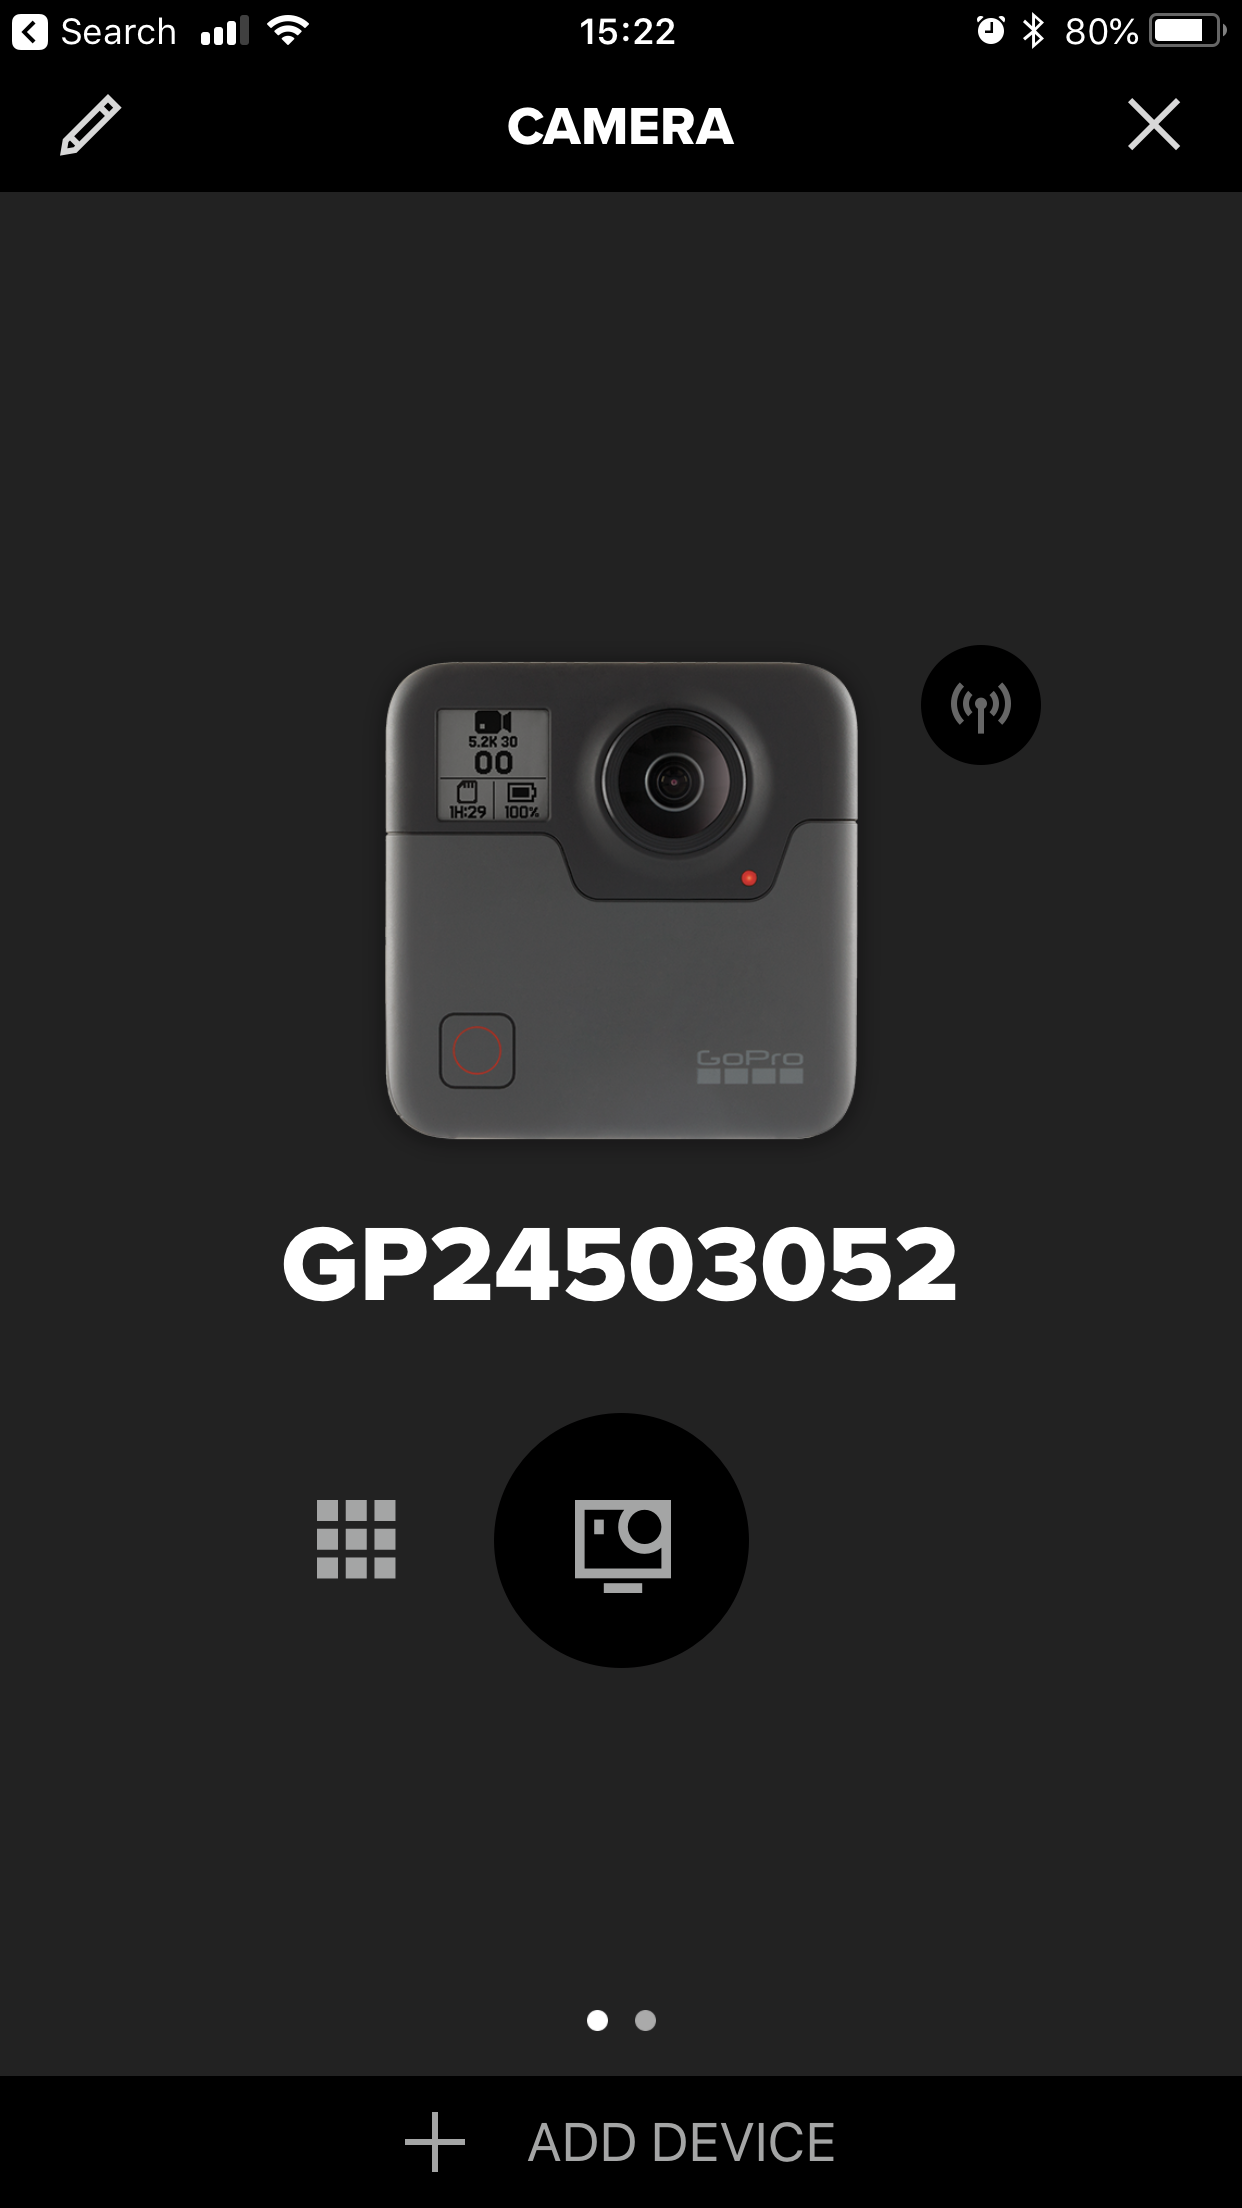 GoPro Fusion 360° Action Camera In-Depth Review